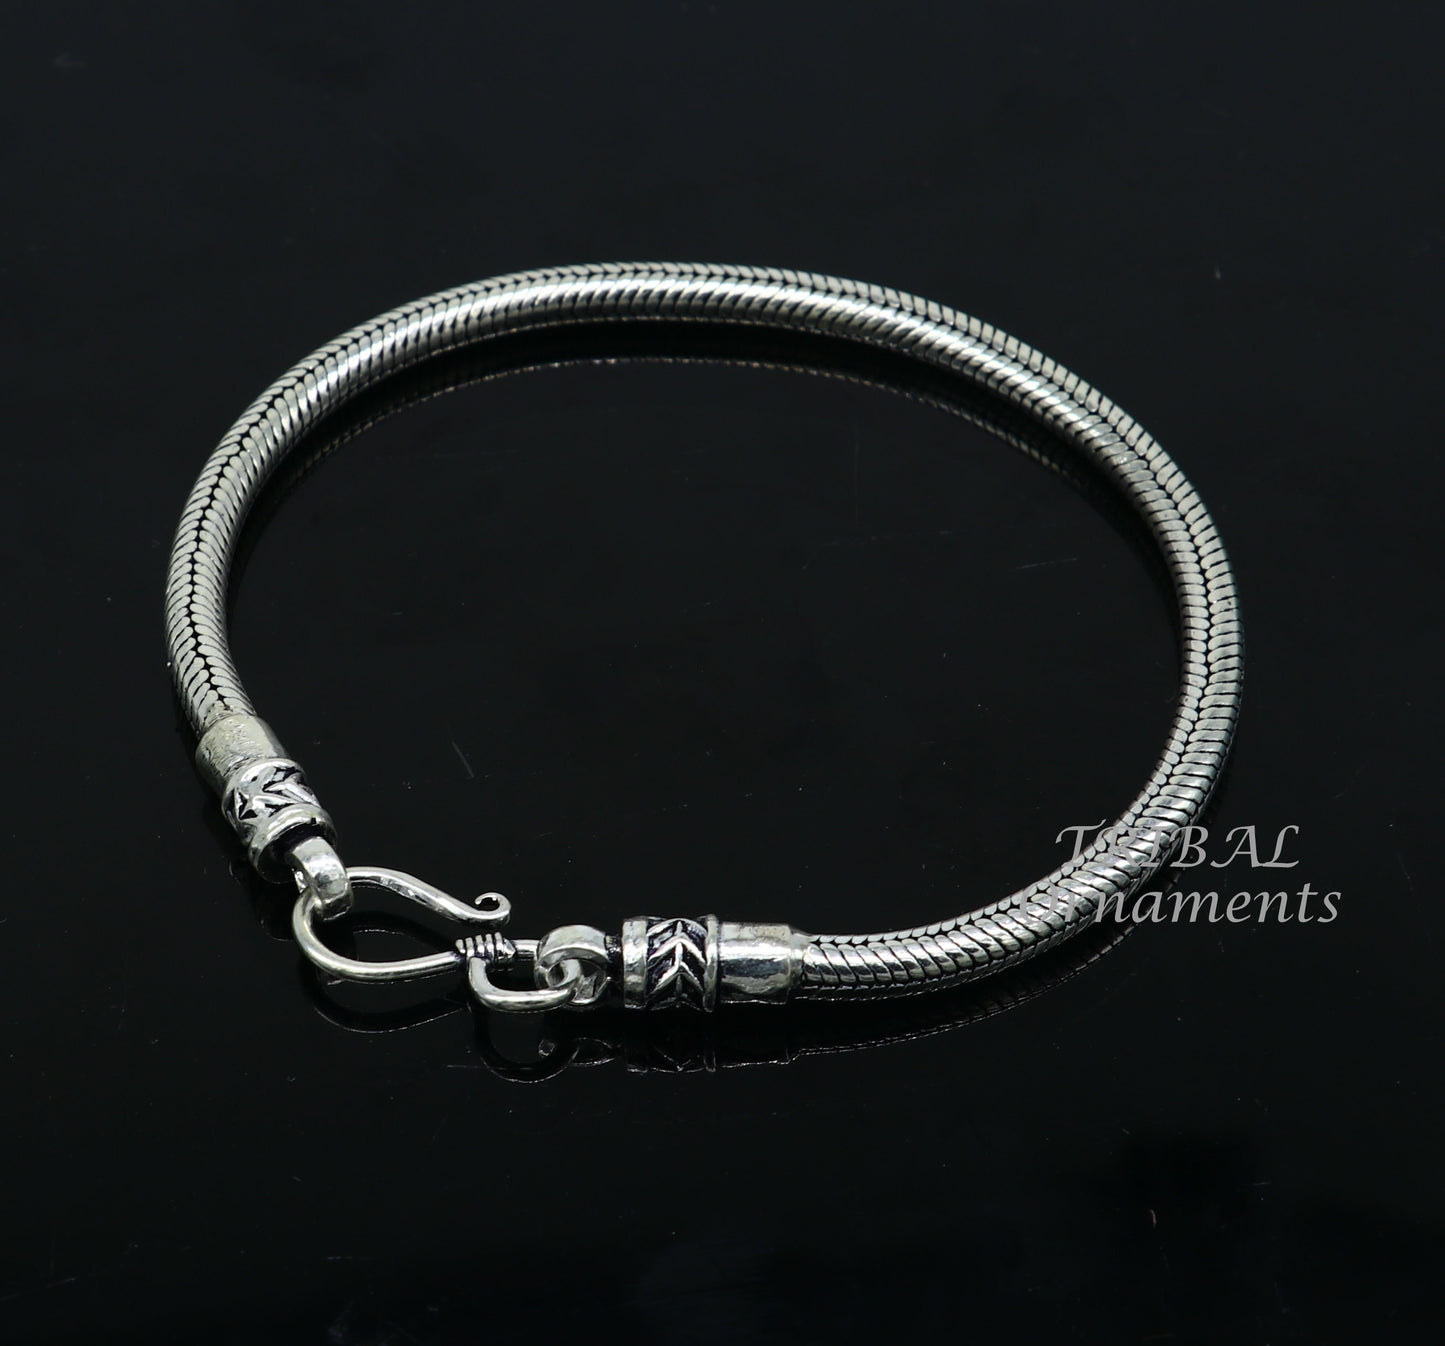 4mm  925 sterling silver handmade amazing inches snake chain flexible unisex bracelet jewelry from Rajasthan india sbr387 - TRIBAL ORNAMENTS